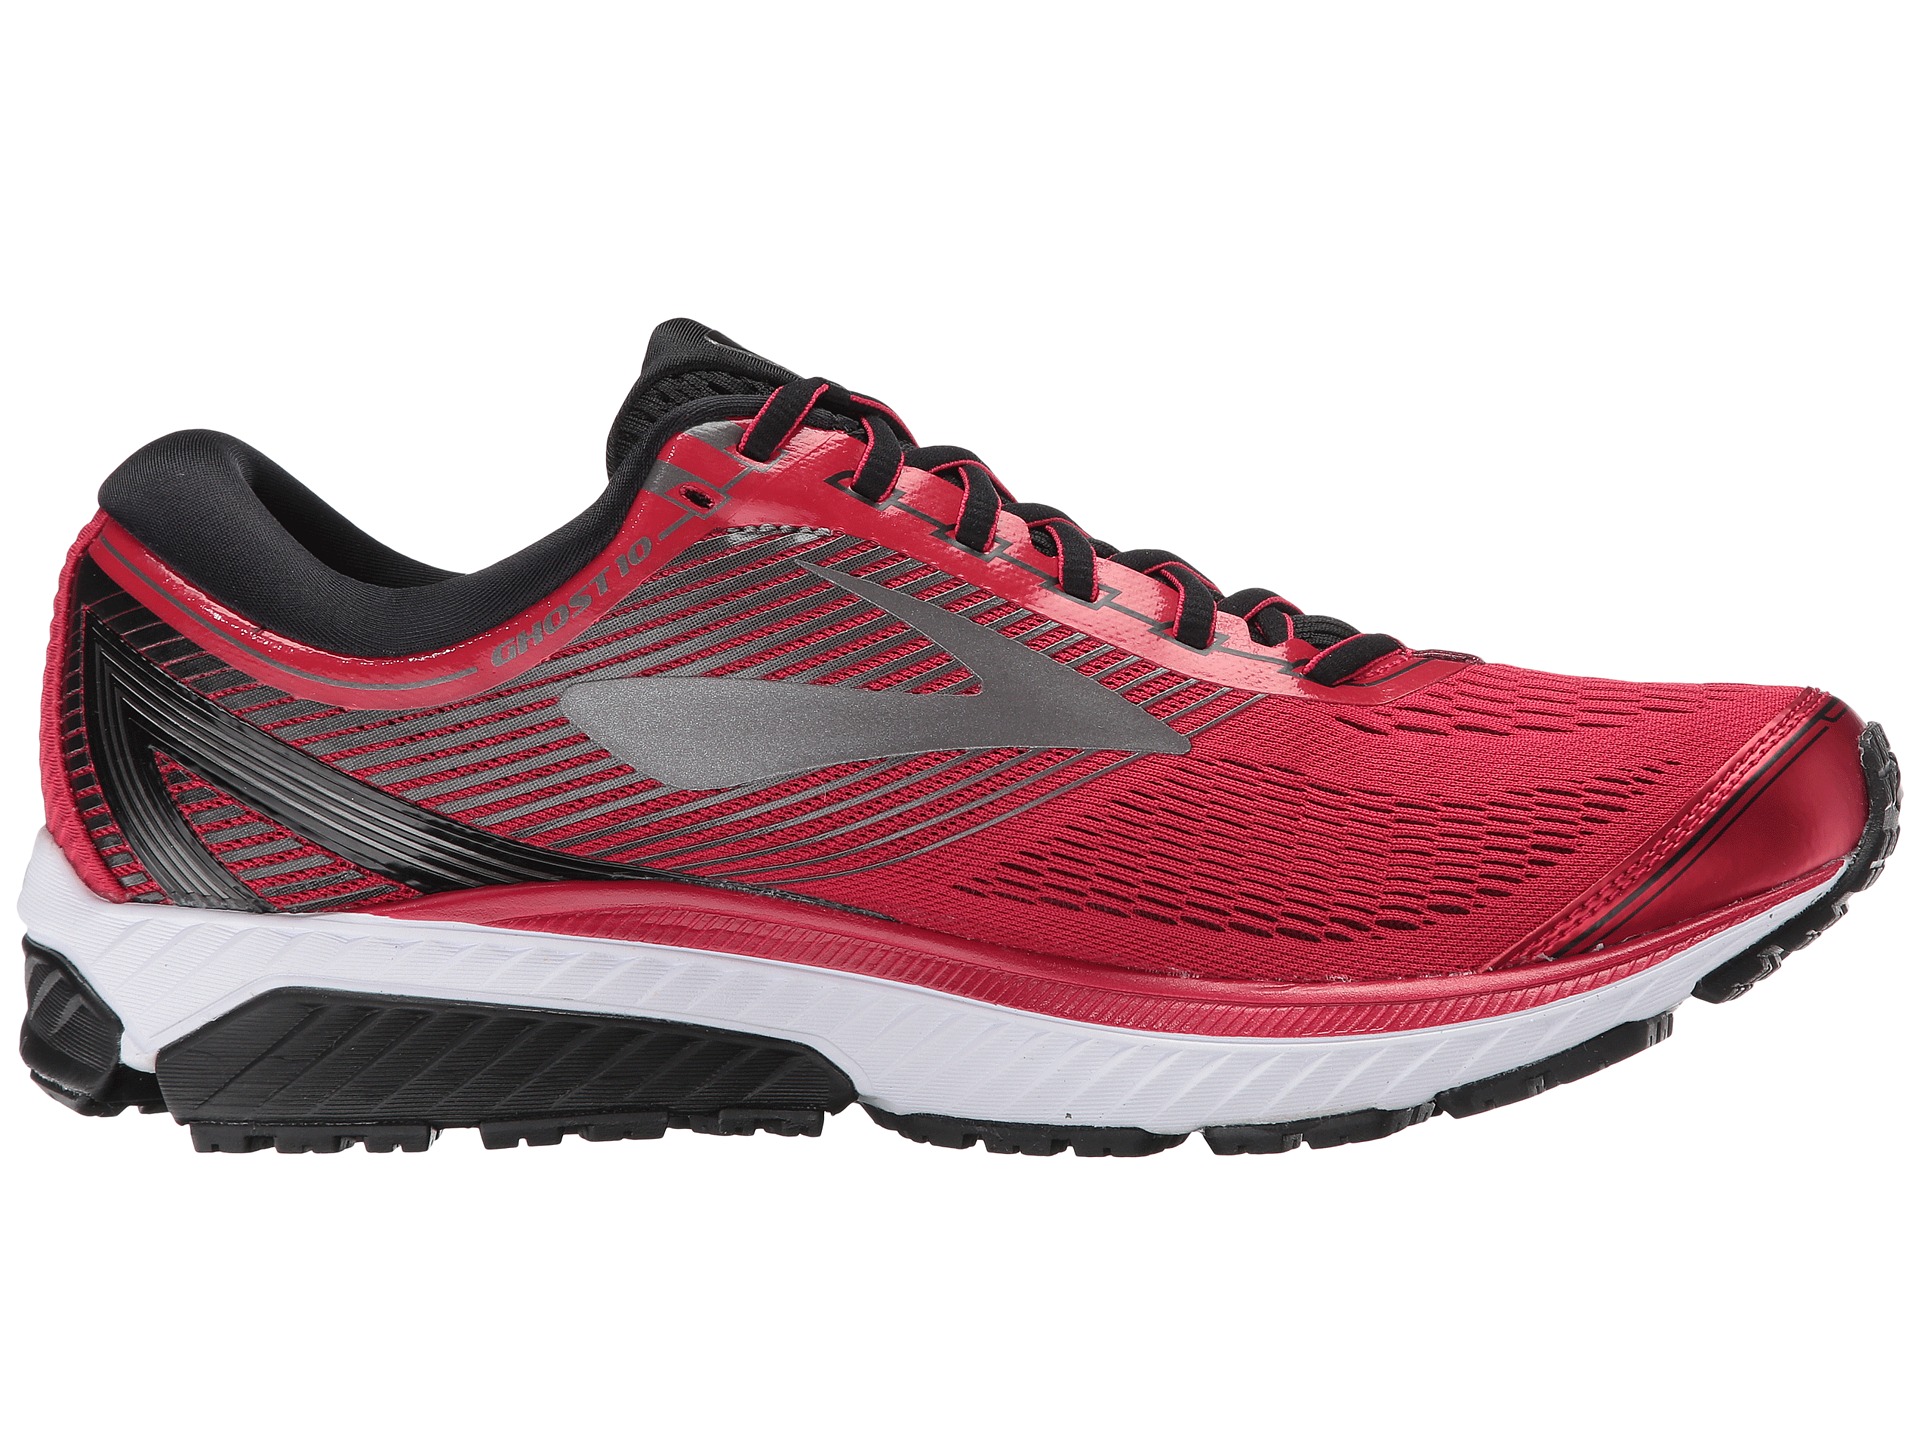 Brooks Ghost 10 at Zappos.com